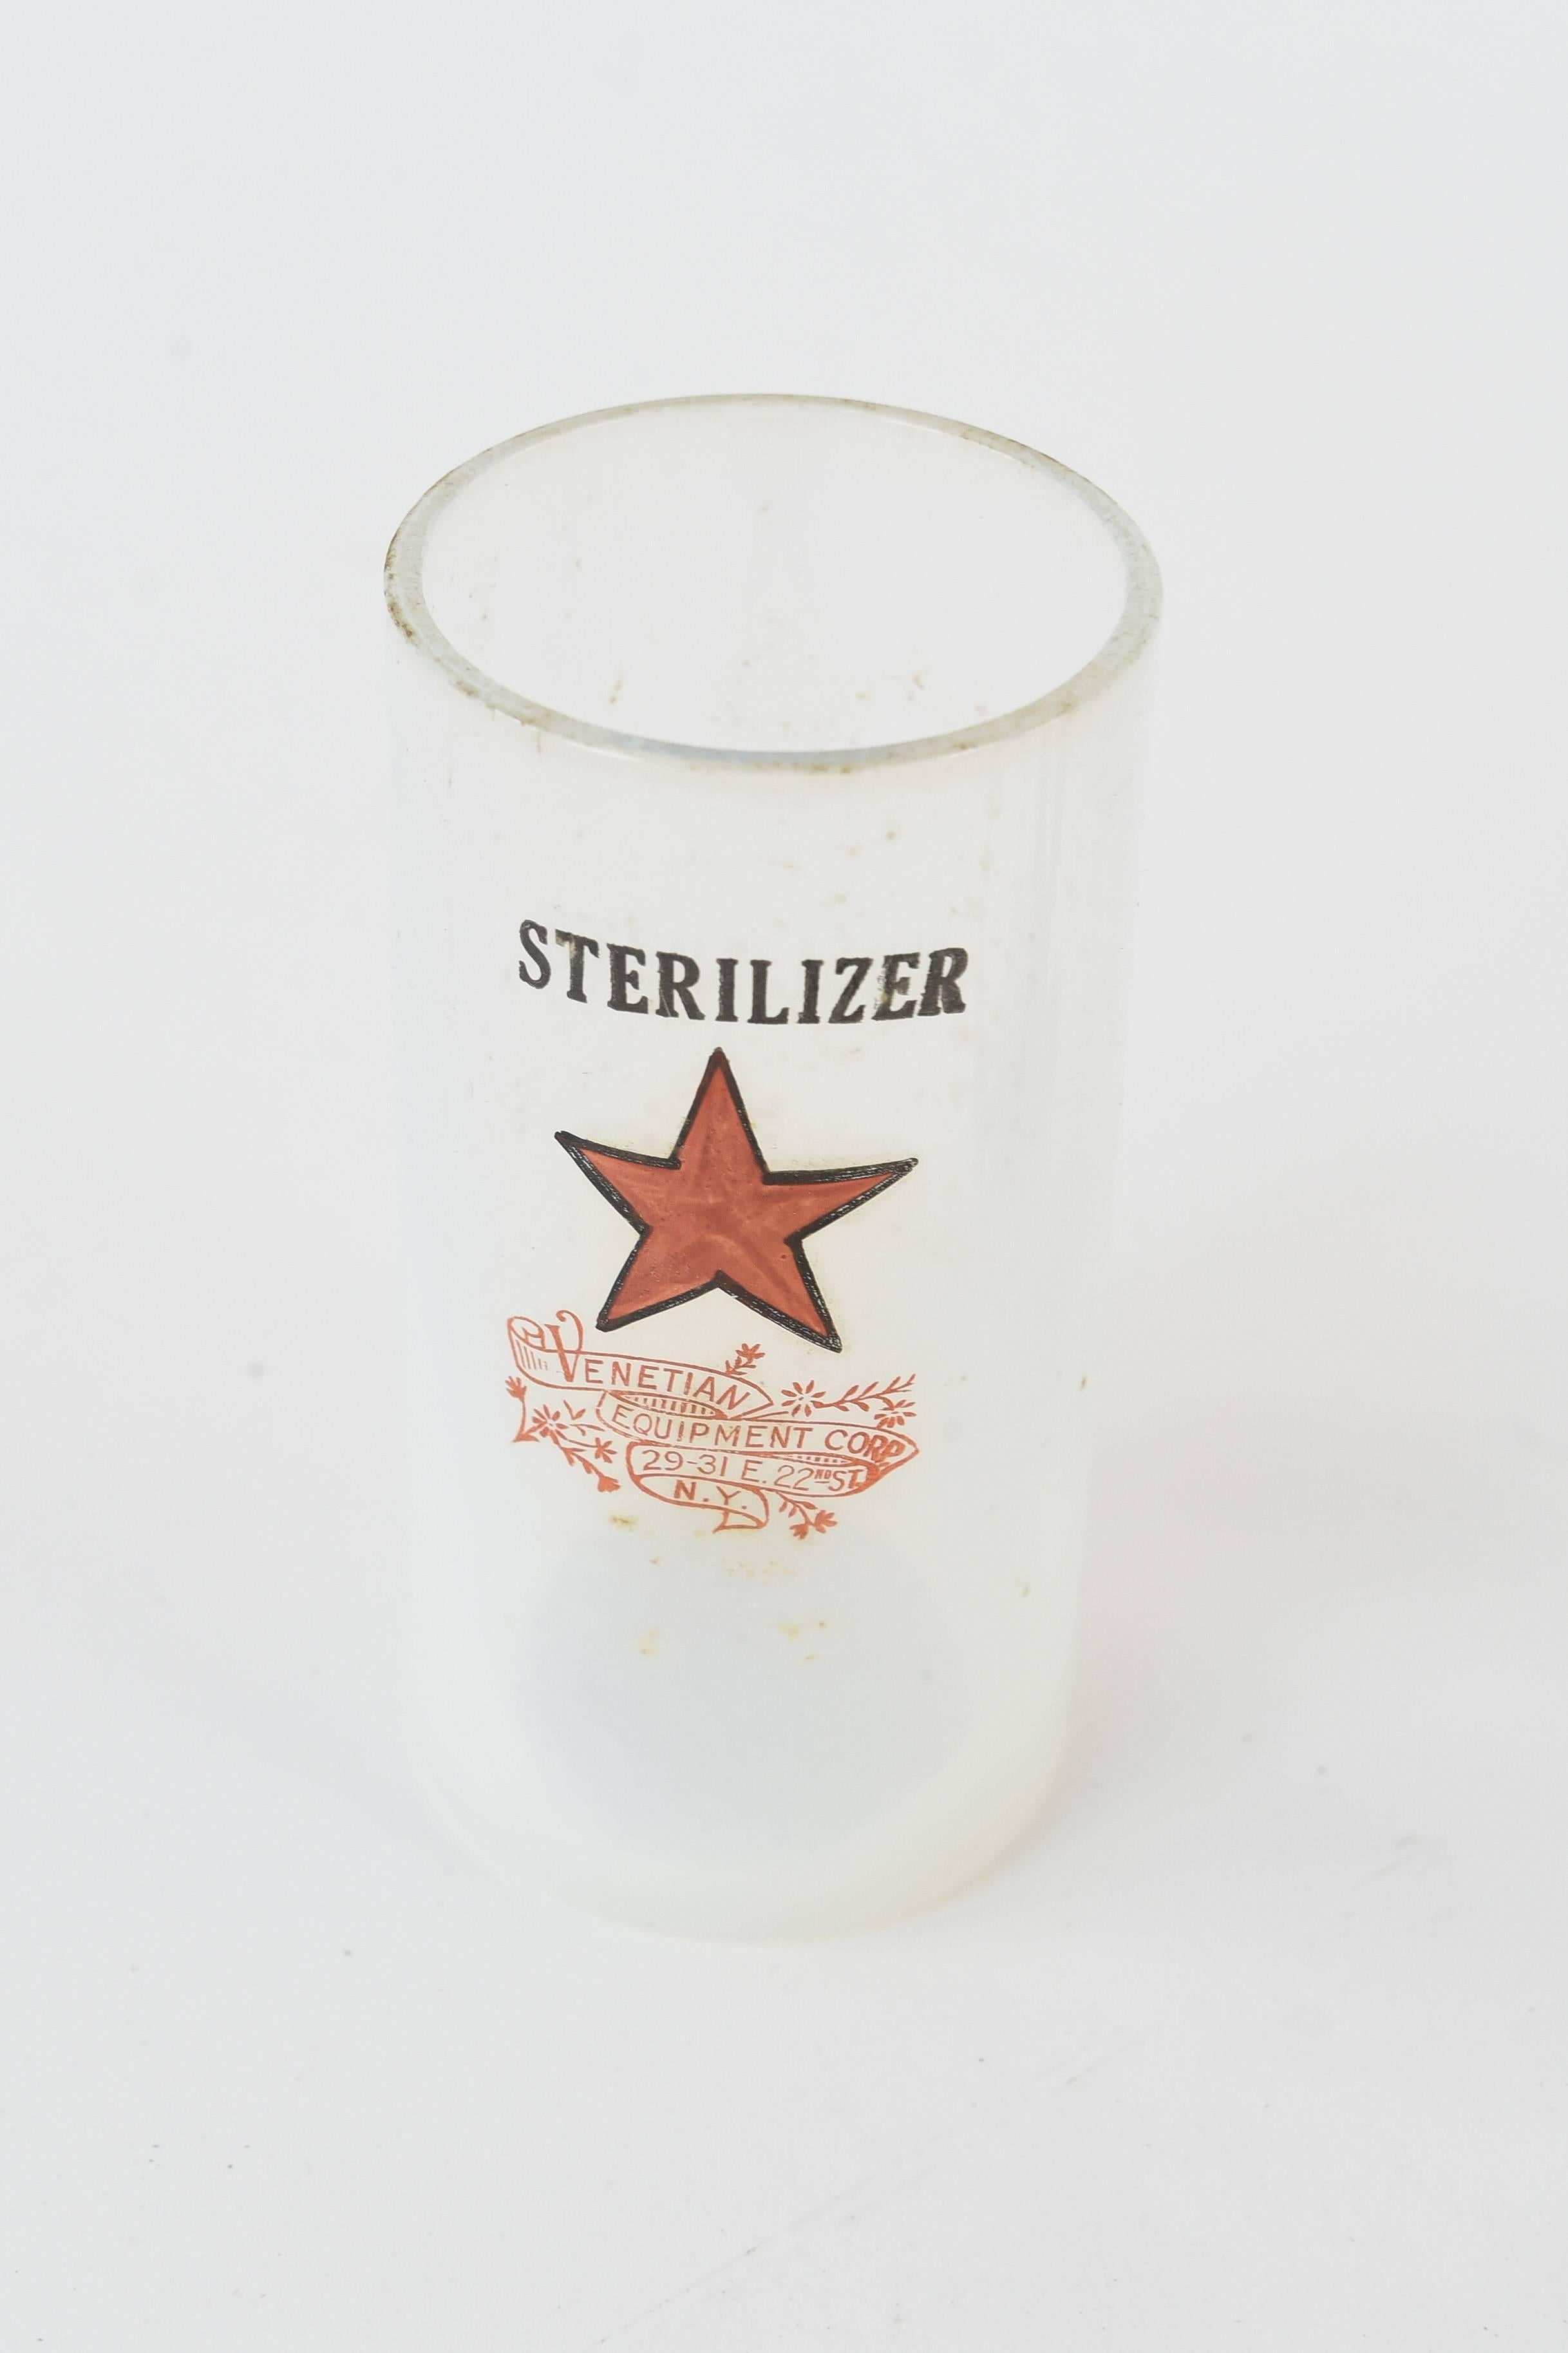 Venetian Equipment Corps. Sterilizer Cup In Good Condition For Sale In Norwalk, CT